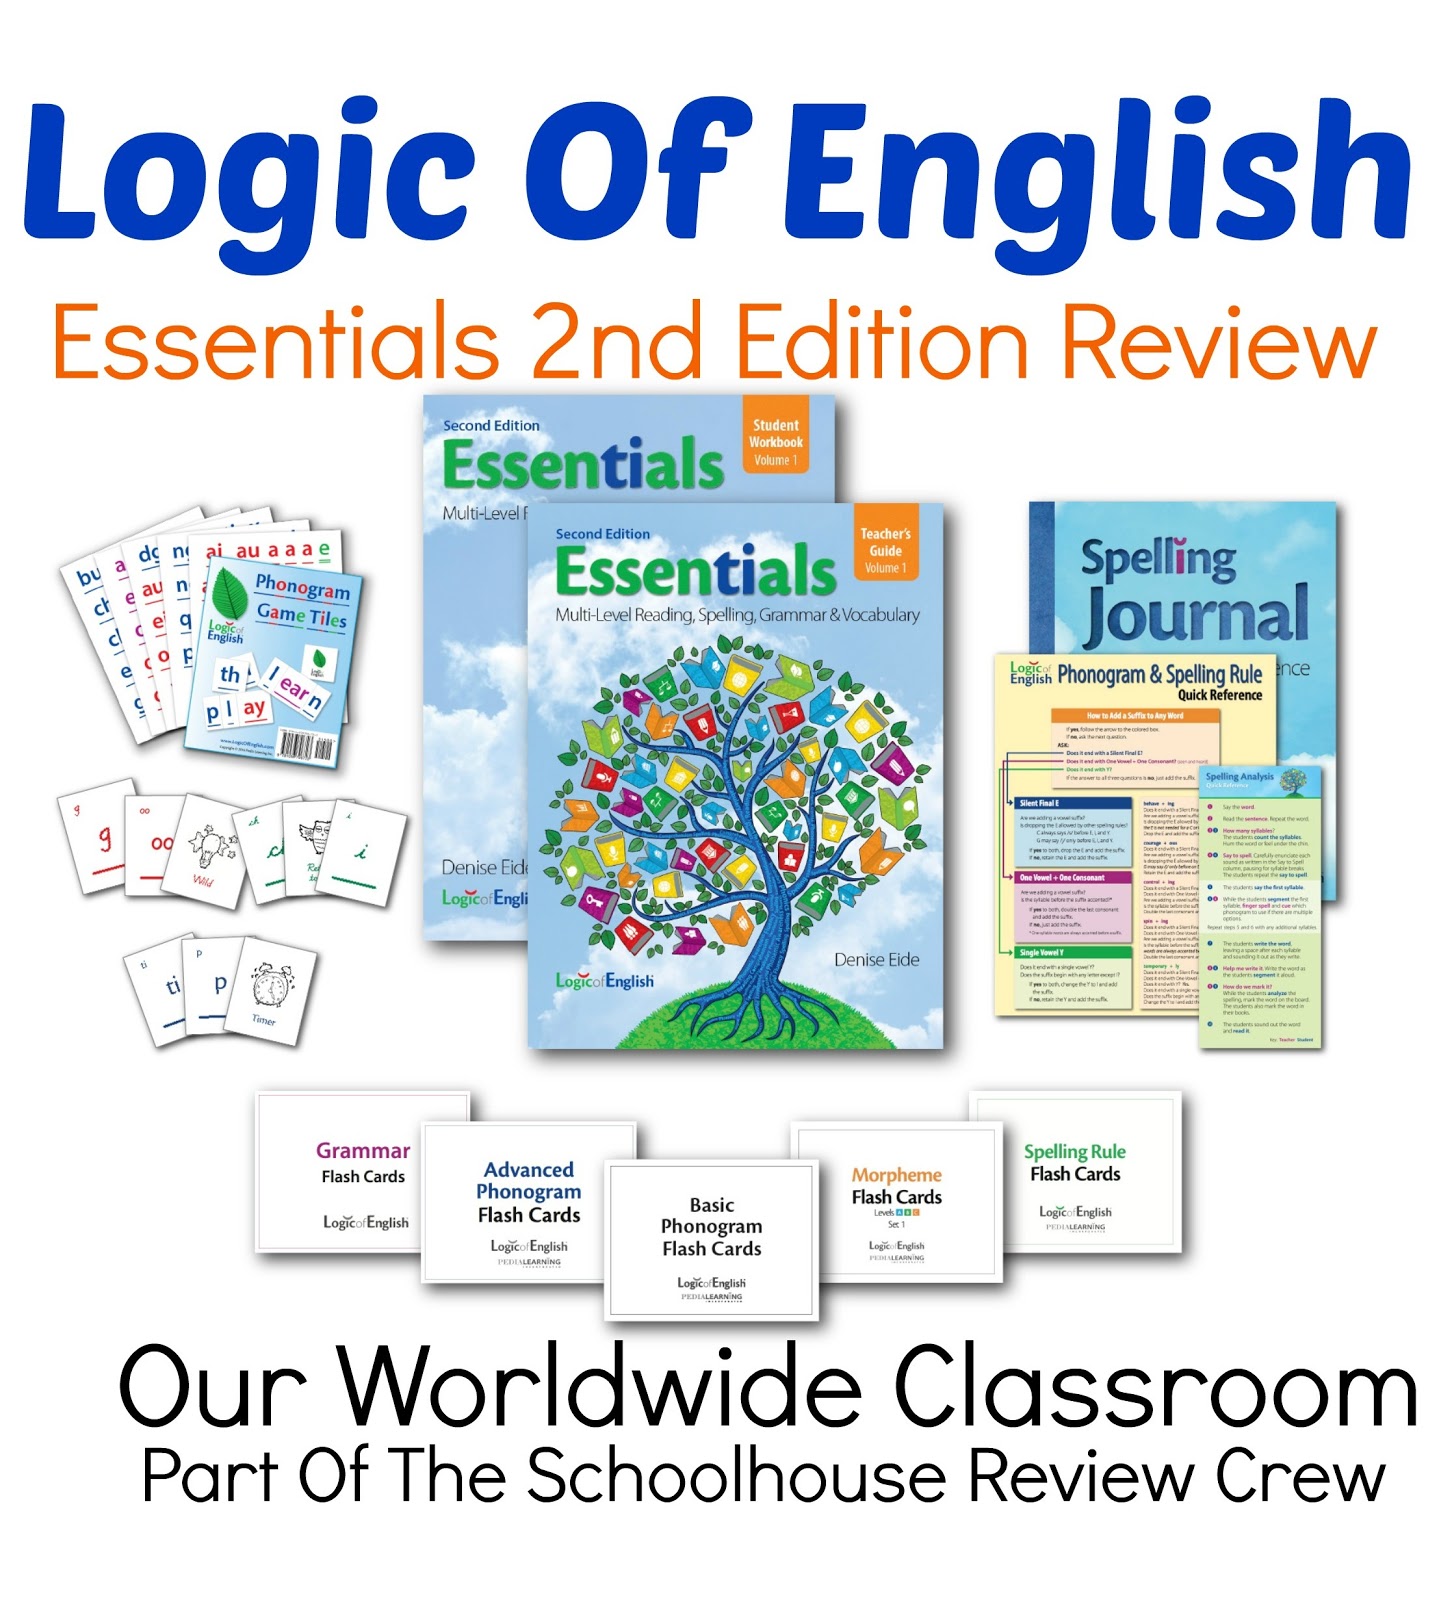 logic-of-english-essentials-a-review